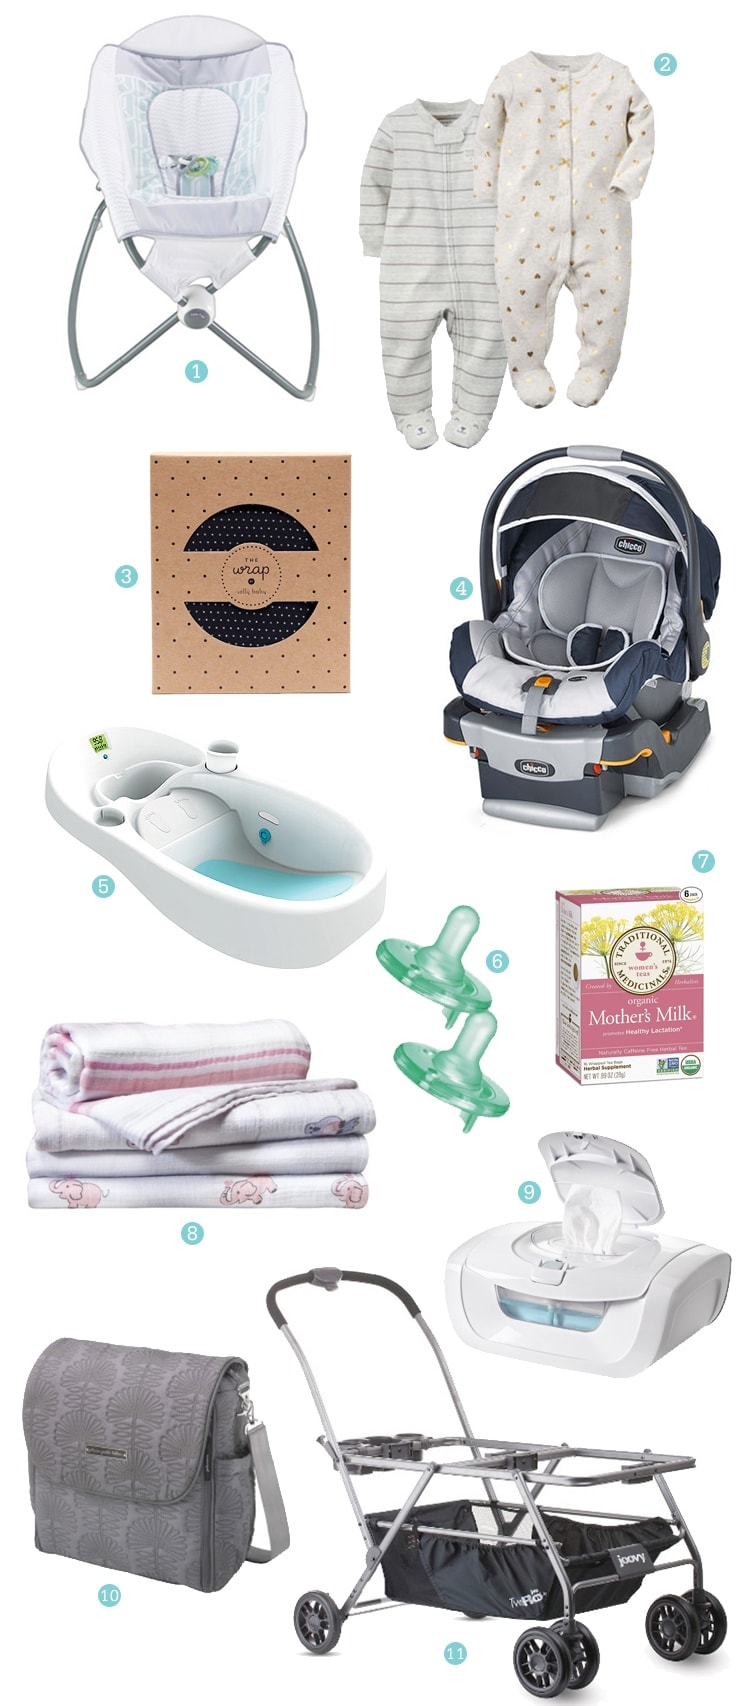 7 Baby essentials for 3-6 month olds - Diary of a So Cal mama